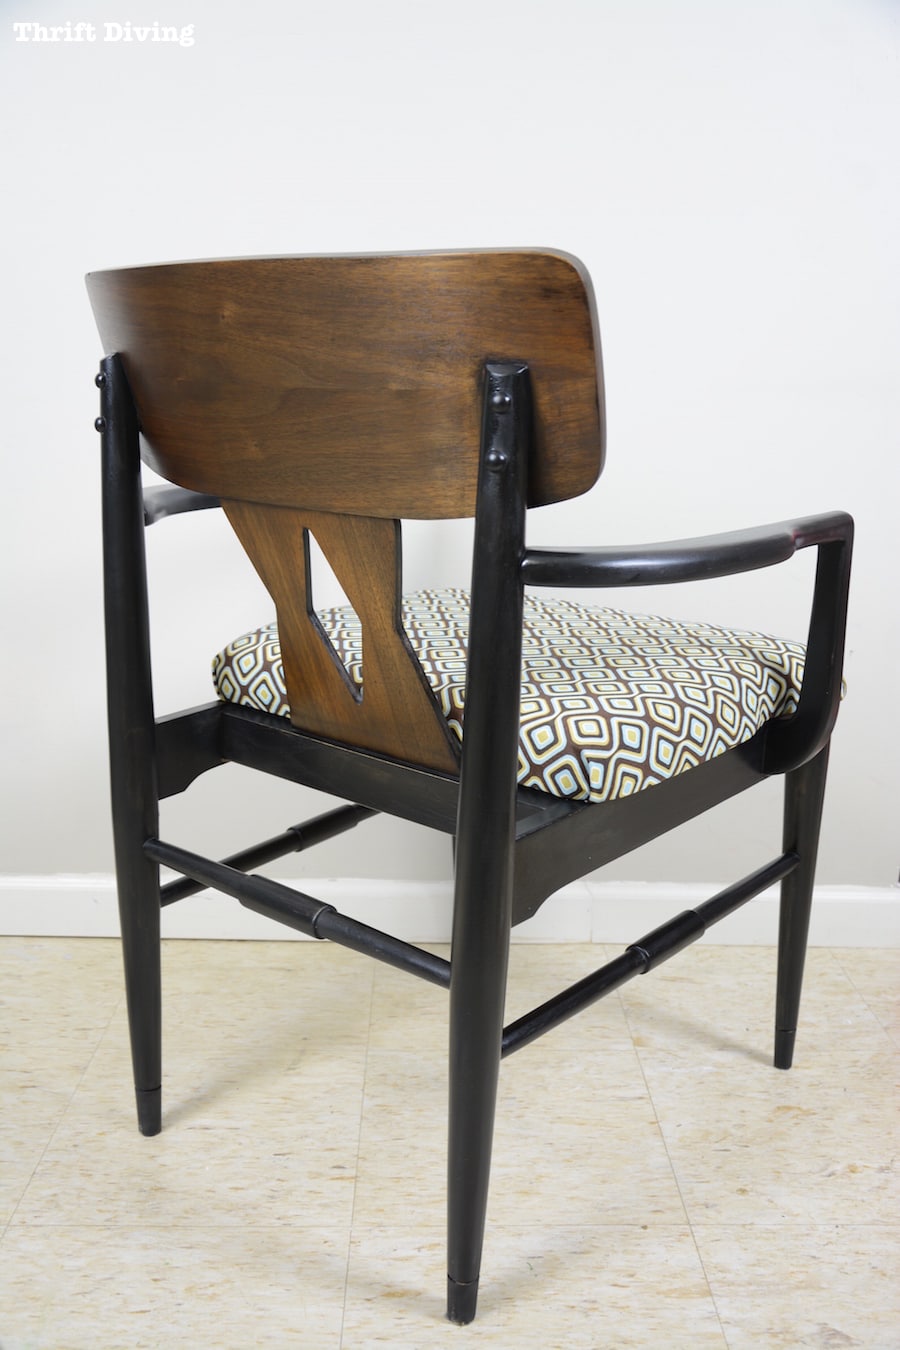 Mid-century modern chair makeover painted black - ThriftDiving.com